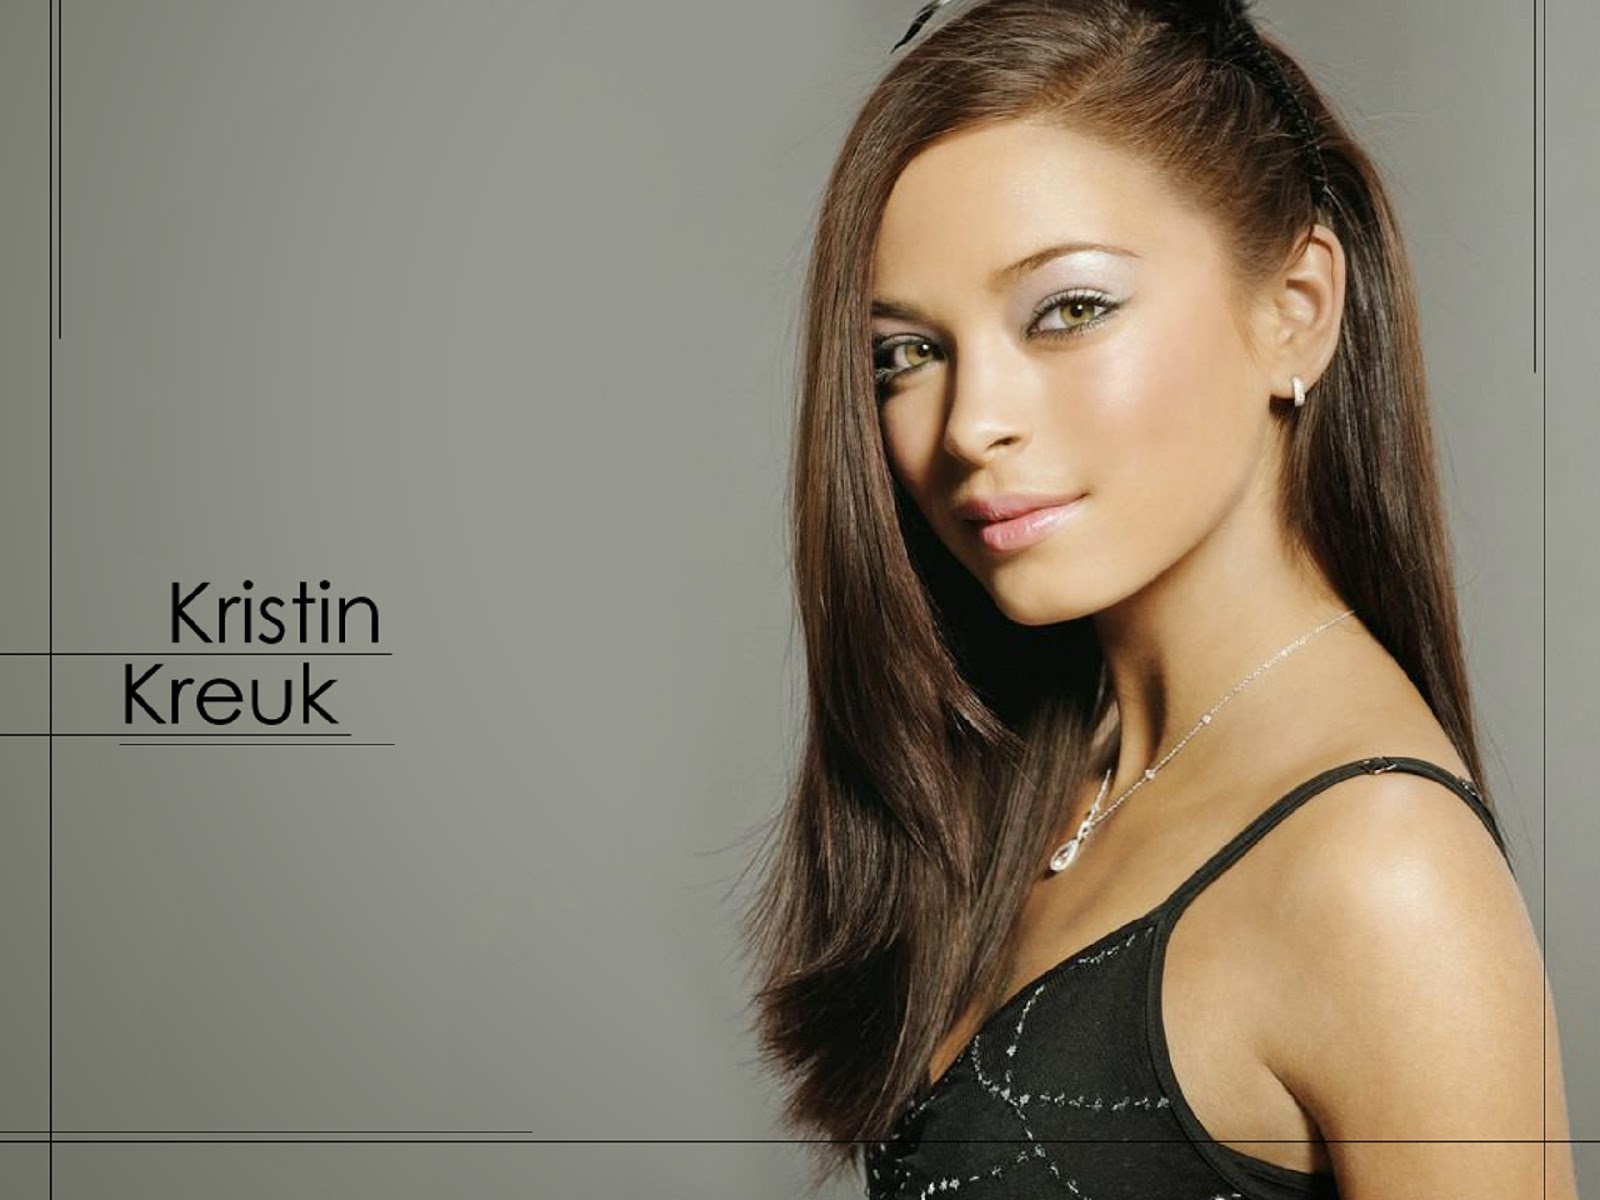 Kristin kreuk nude pictures - Adult gallery